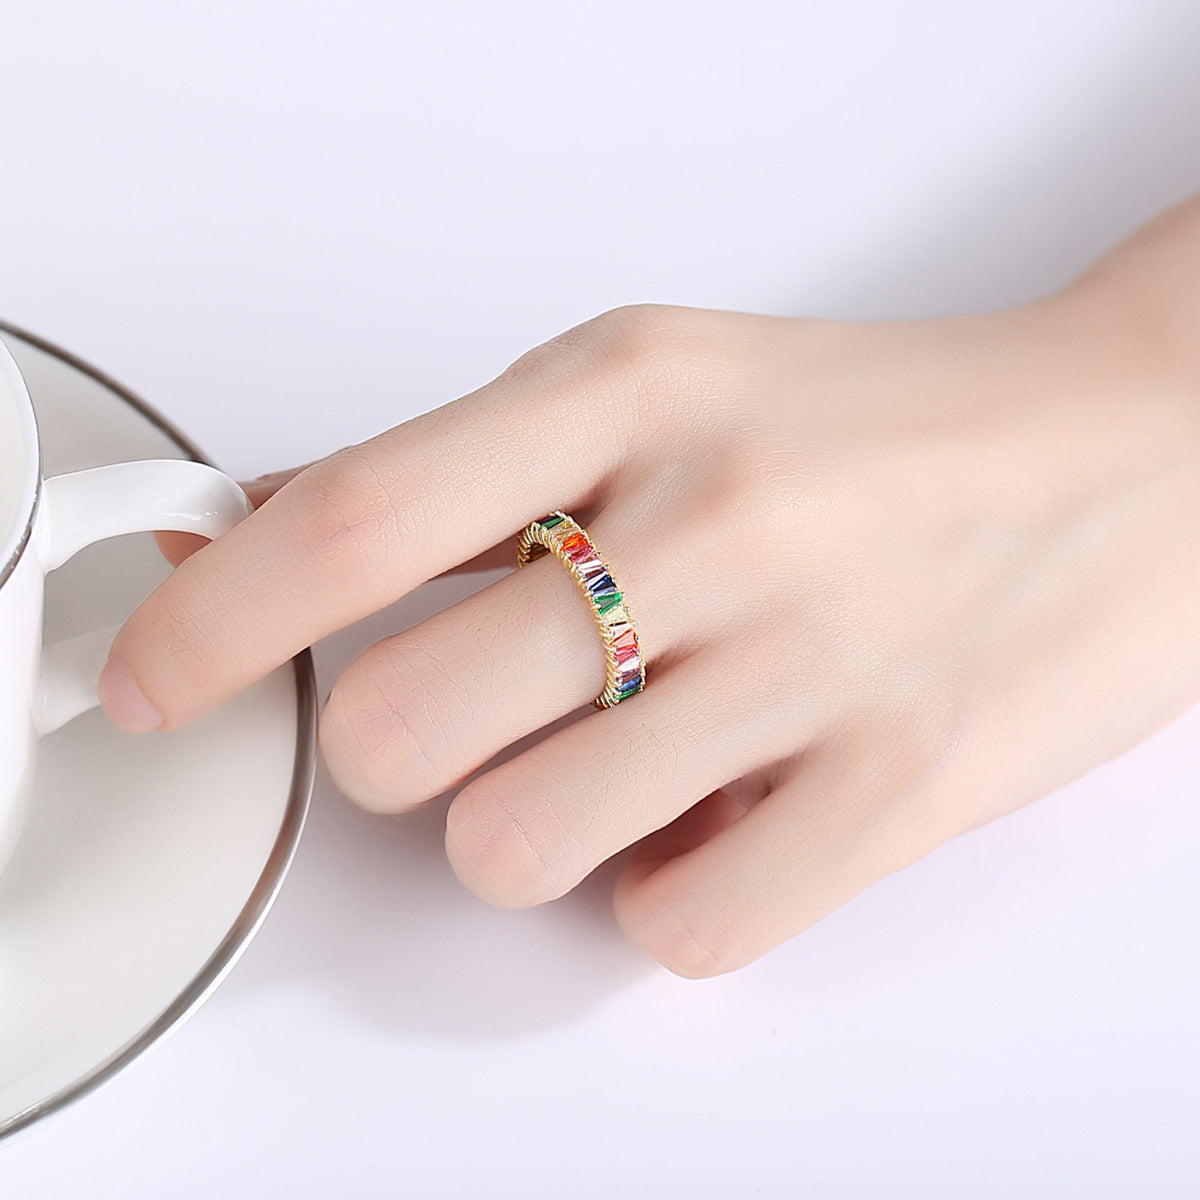 Gemstonely-Chic 925 Silver Rainbow Zirconia Women's Ring - Distinctive Vintage Style for a Standout Accessory